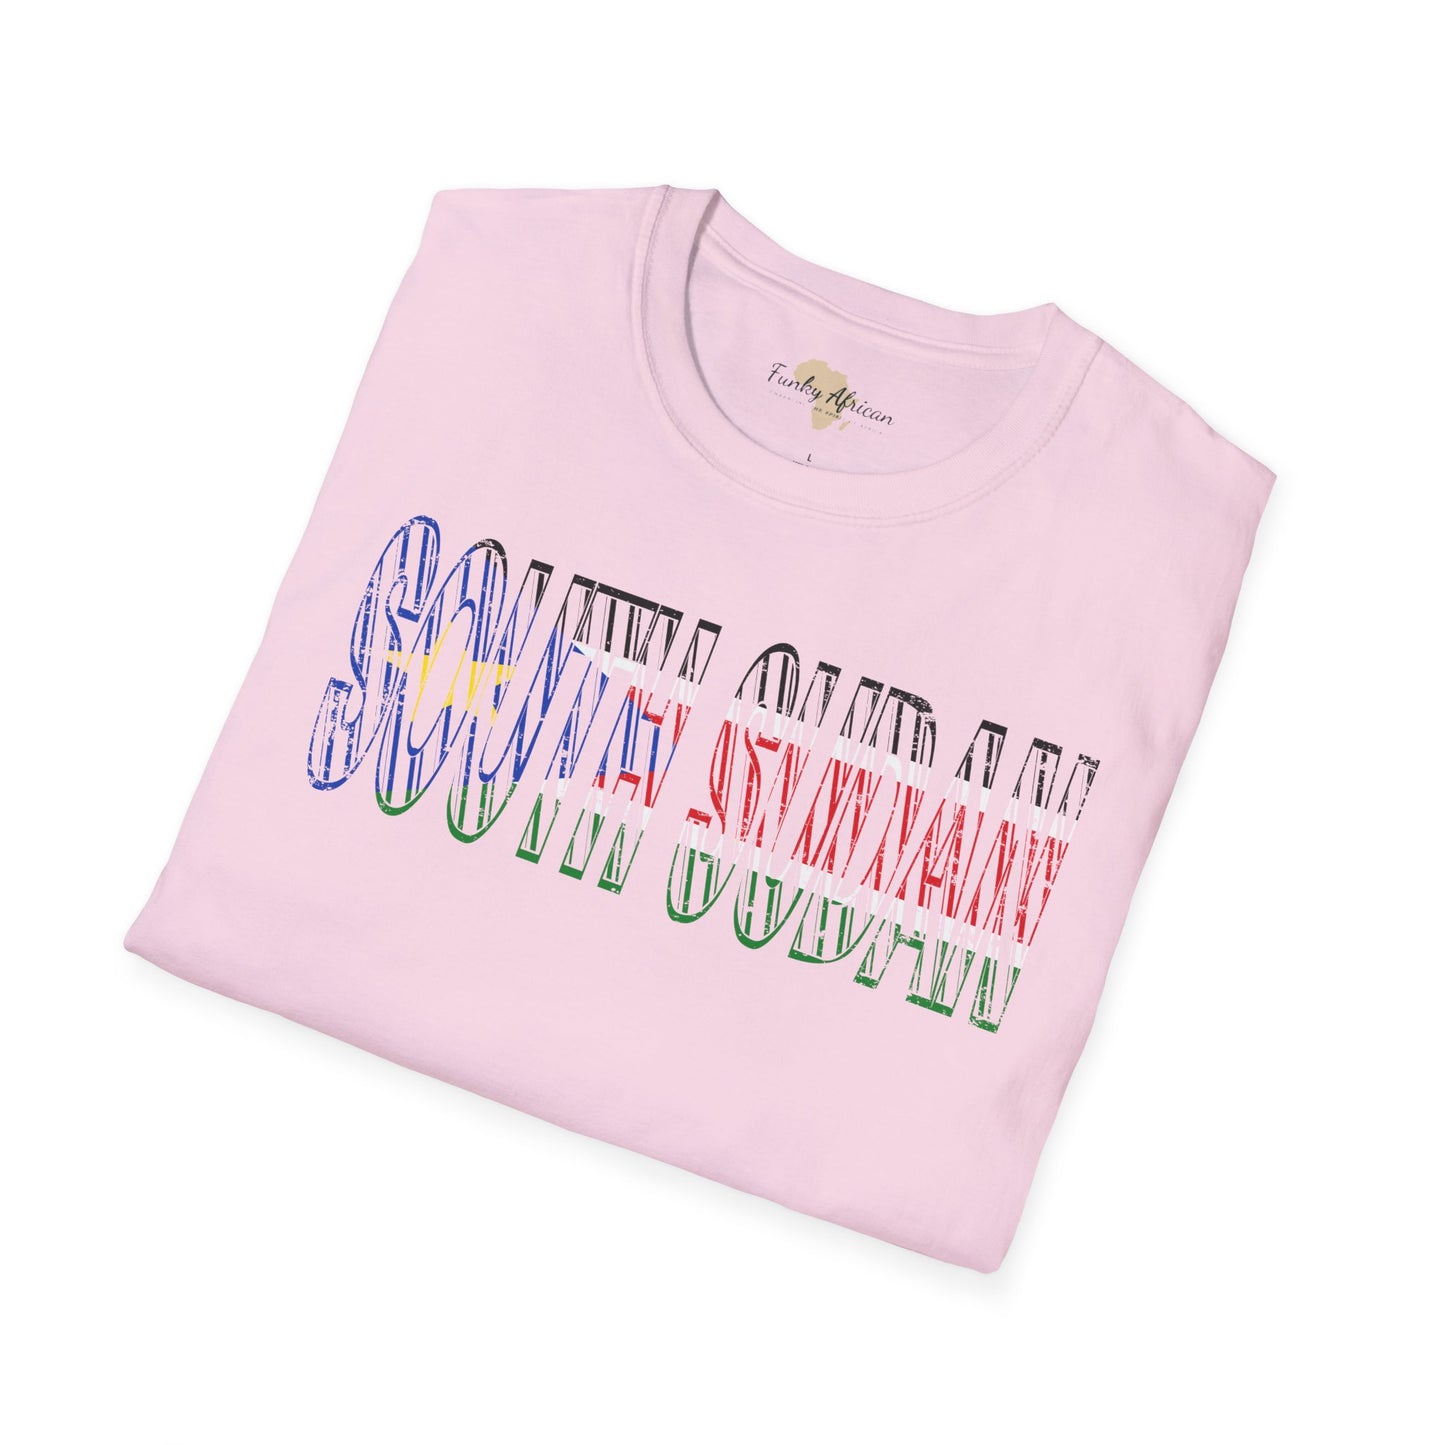 South Sudan text unisex softstyle tee